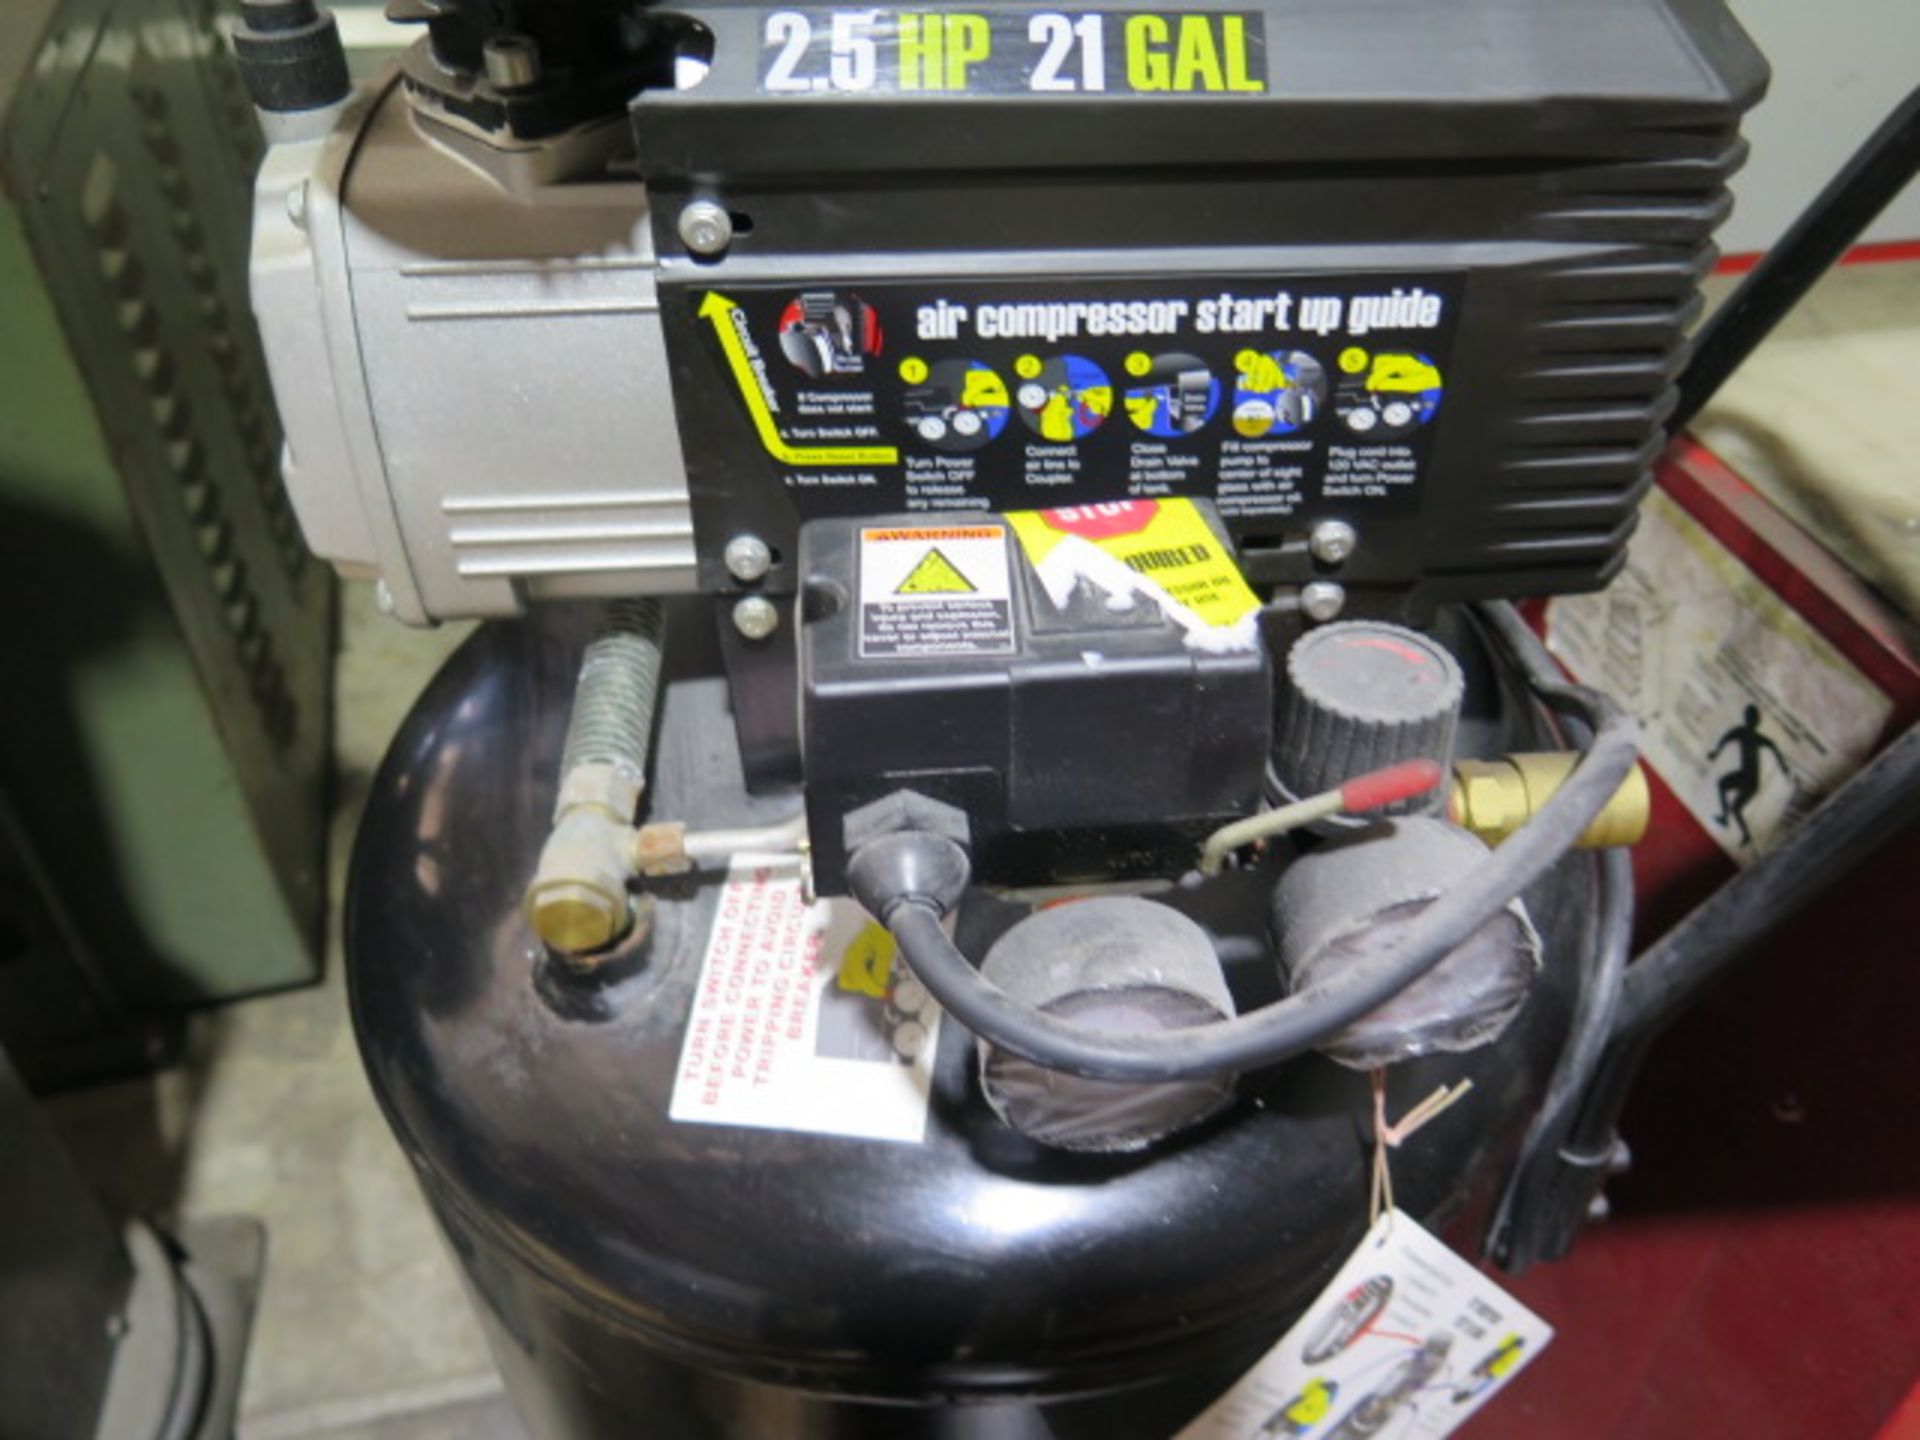 Central Pneumatic Portable 2.5Hp Air Compressor w/ 21 Gallon Tank (SOLD AS-IS - NO WARRANTY) - Image 4 of 5